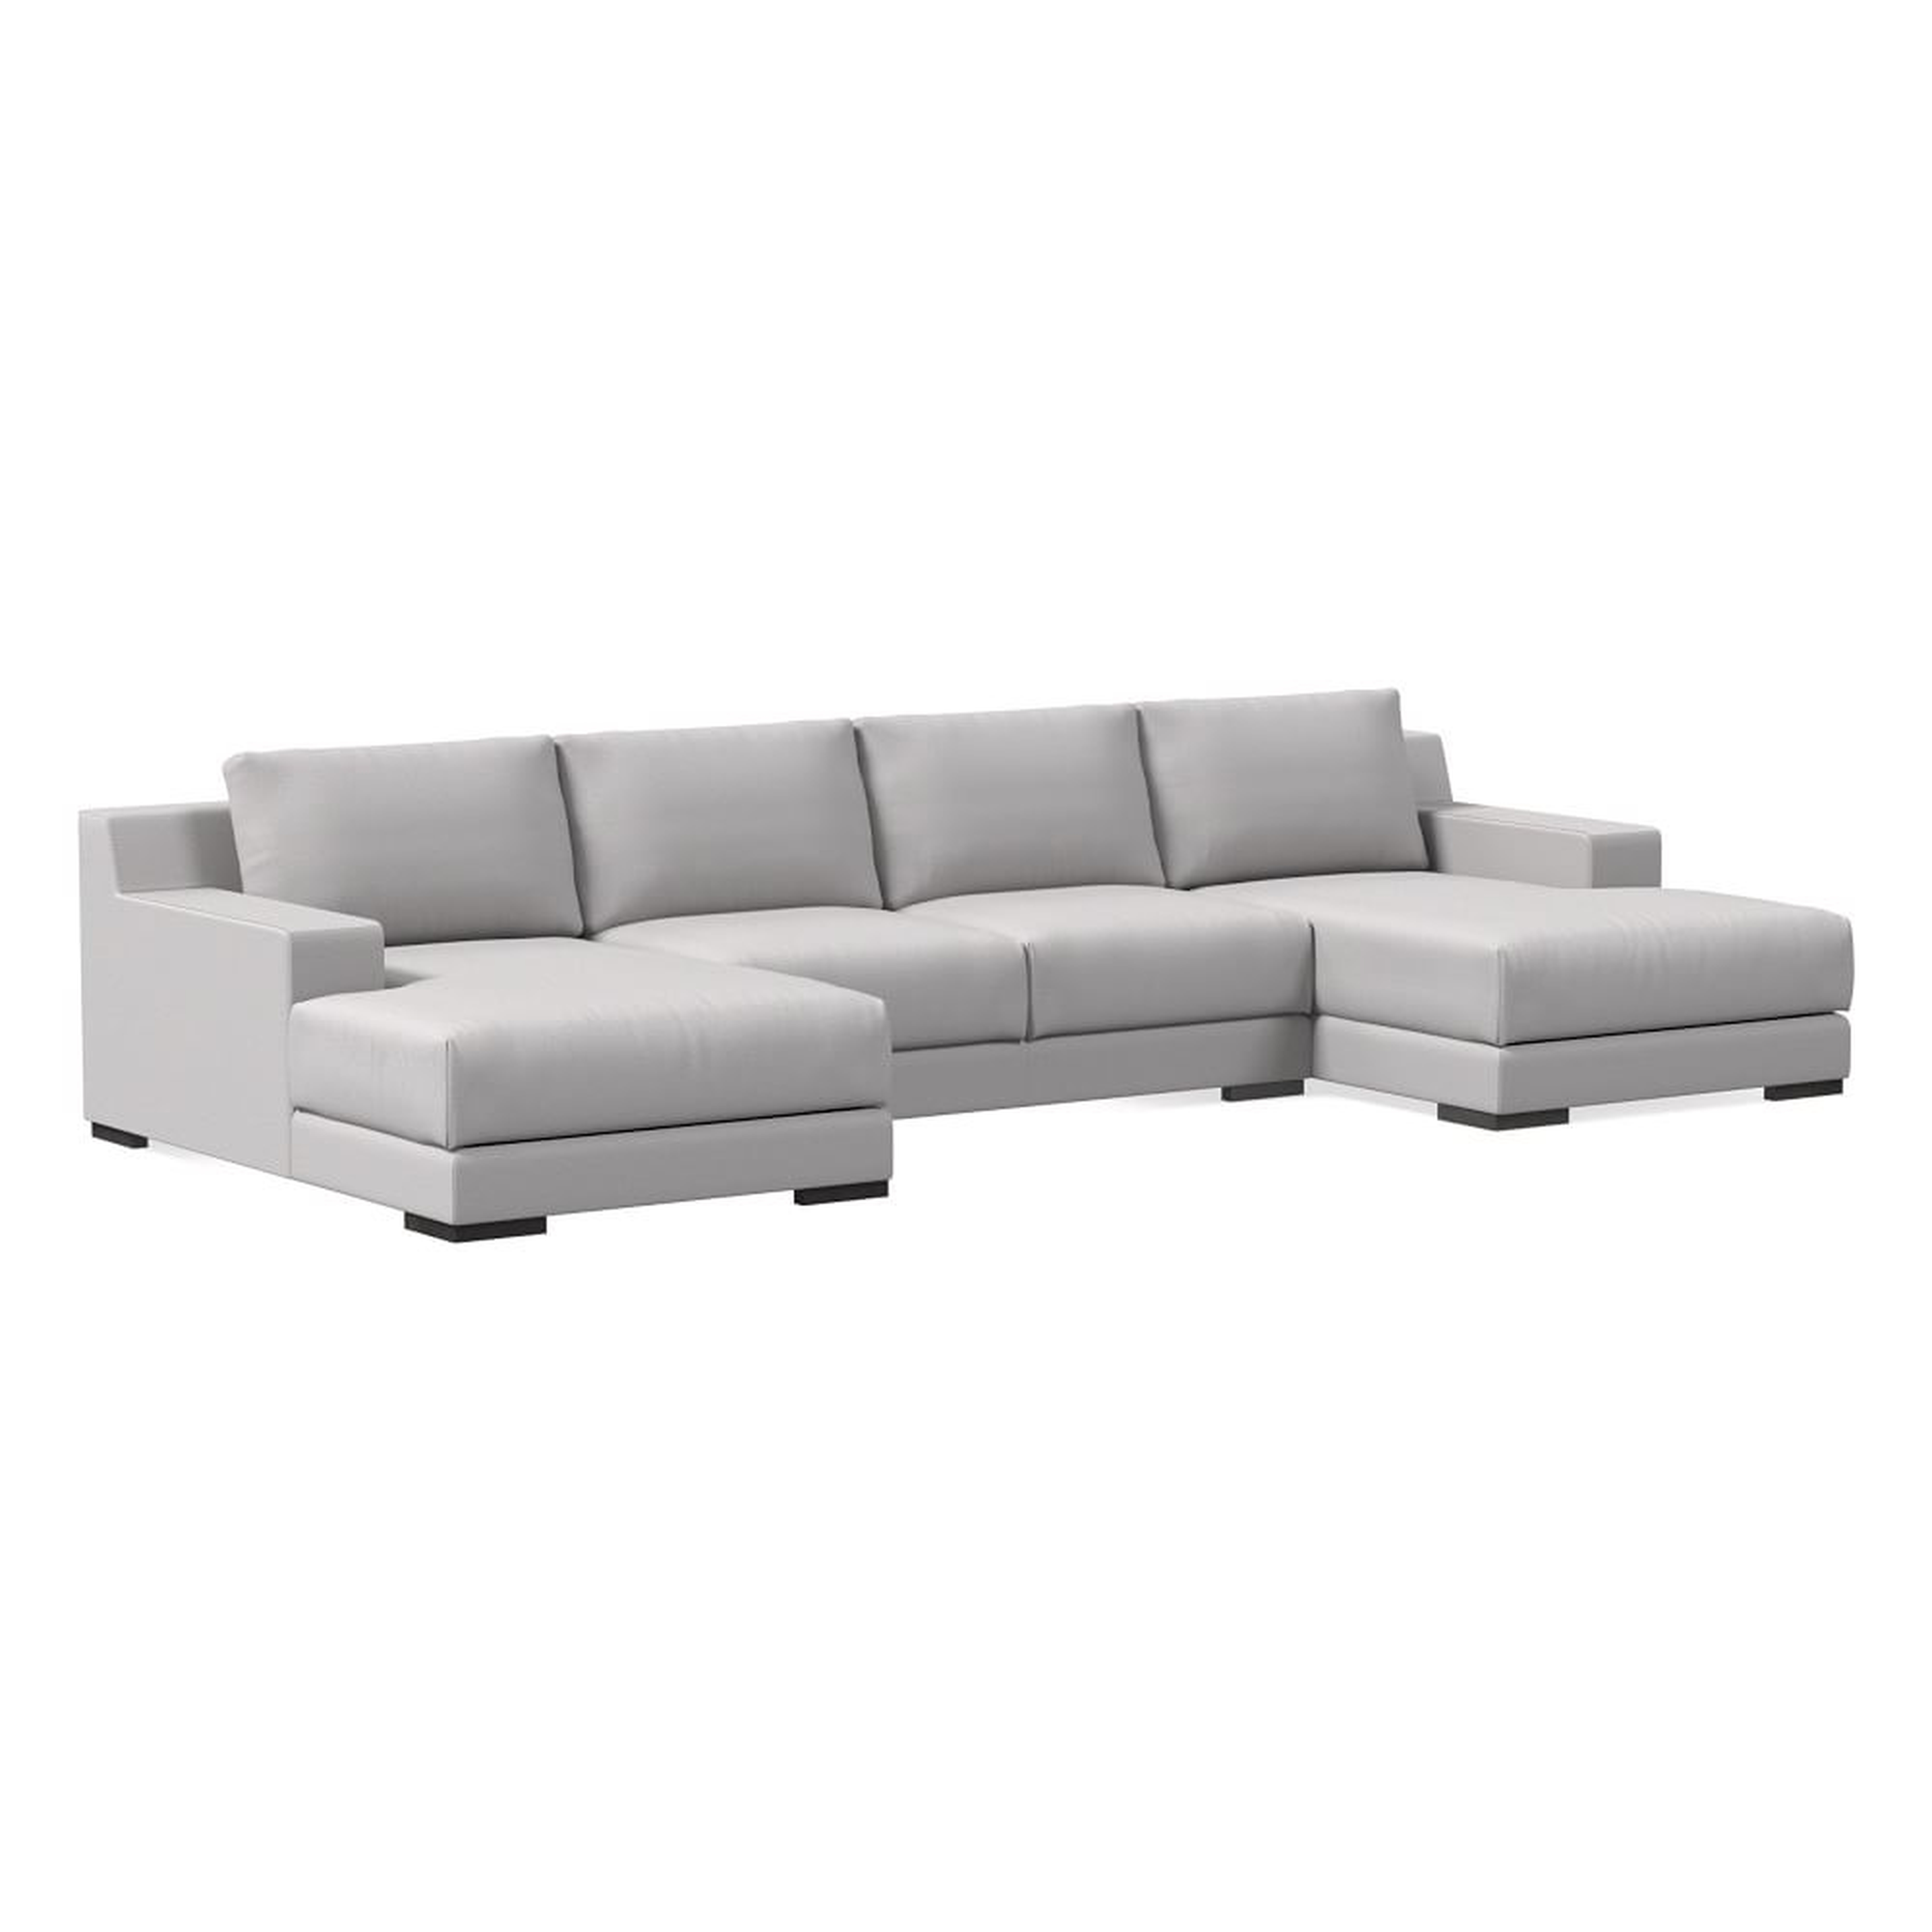 Dalton 151" 3-Piece U-Shaped Chaise Sectional, Chenille Tweed, Frost Gray, Black - West Elm